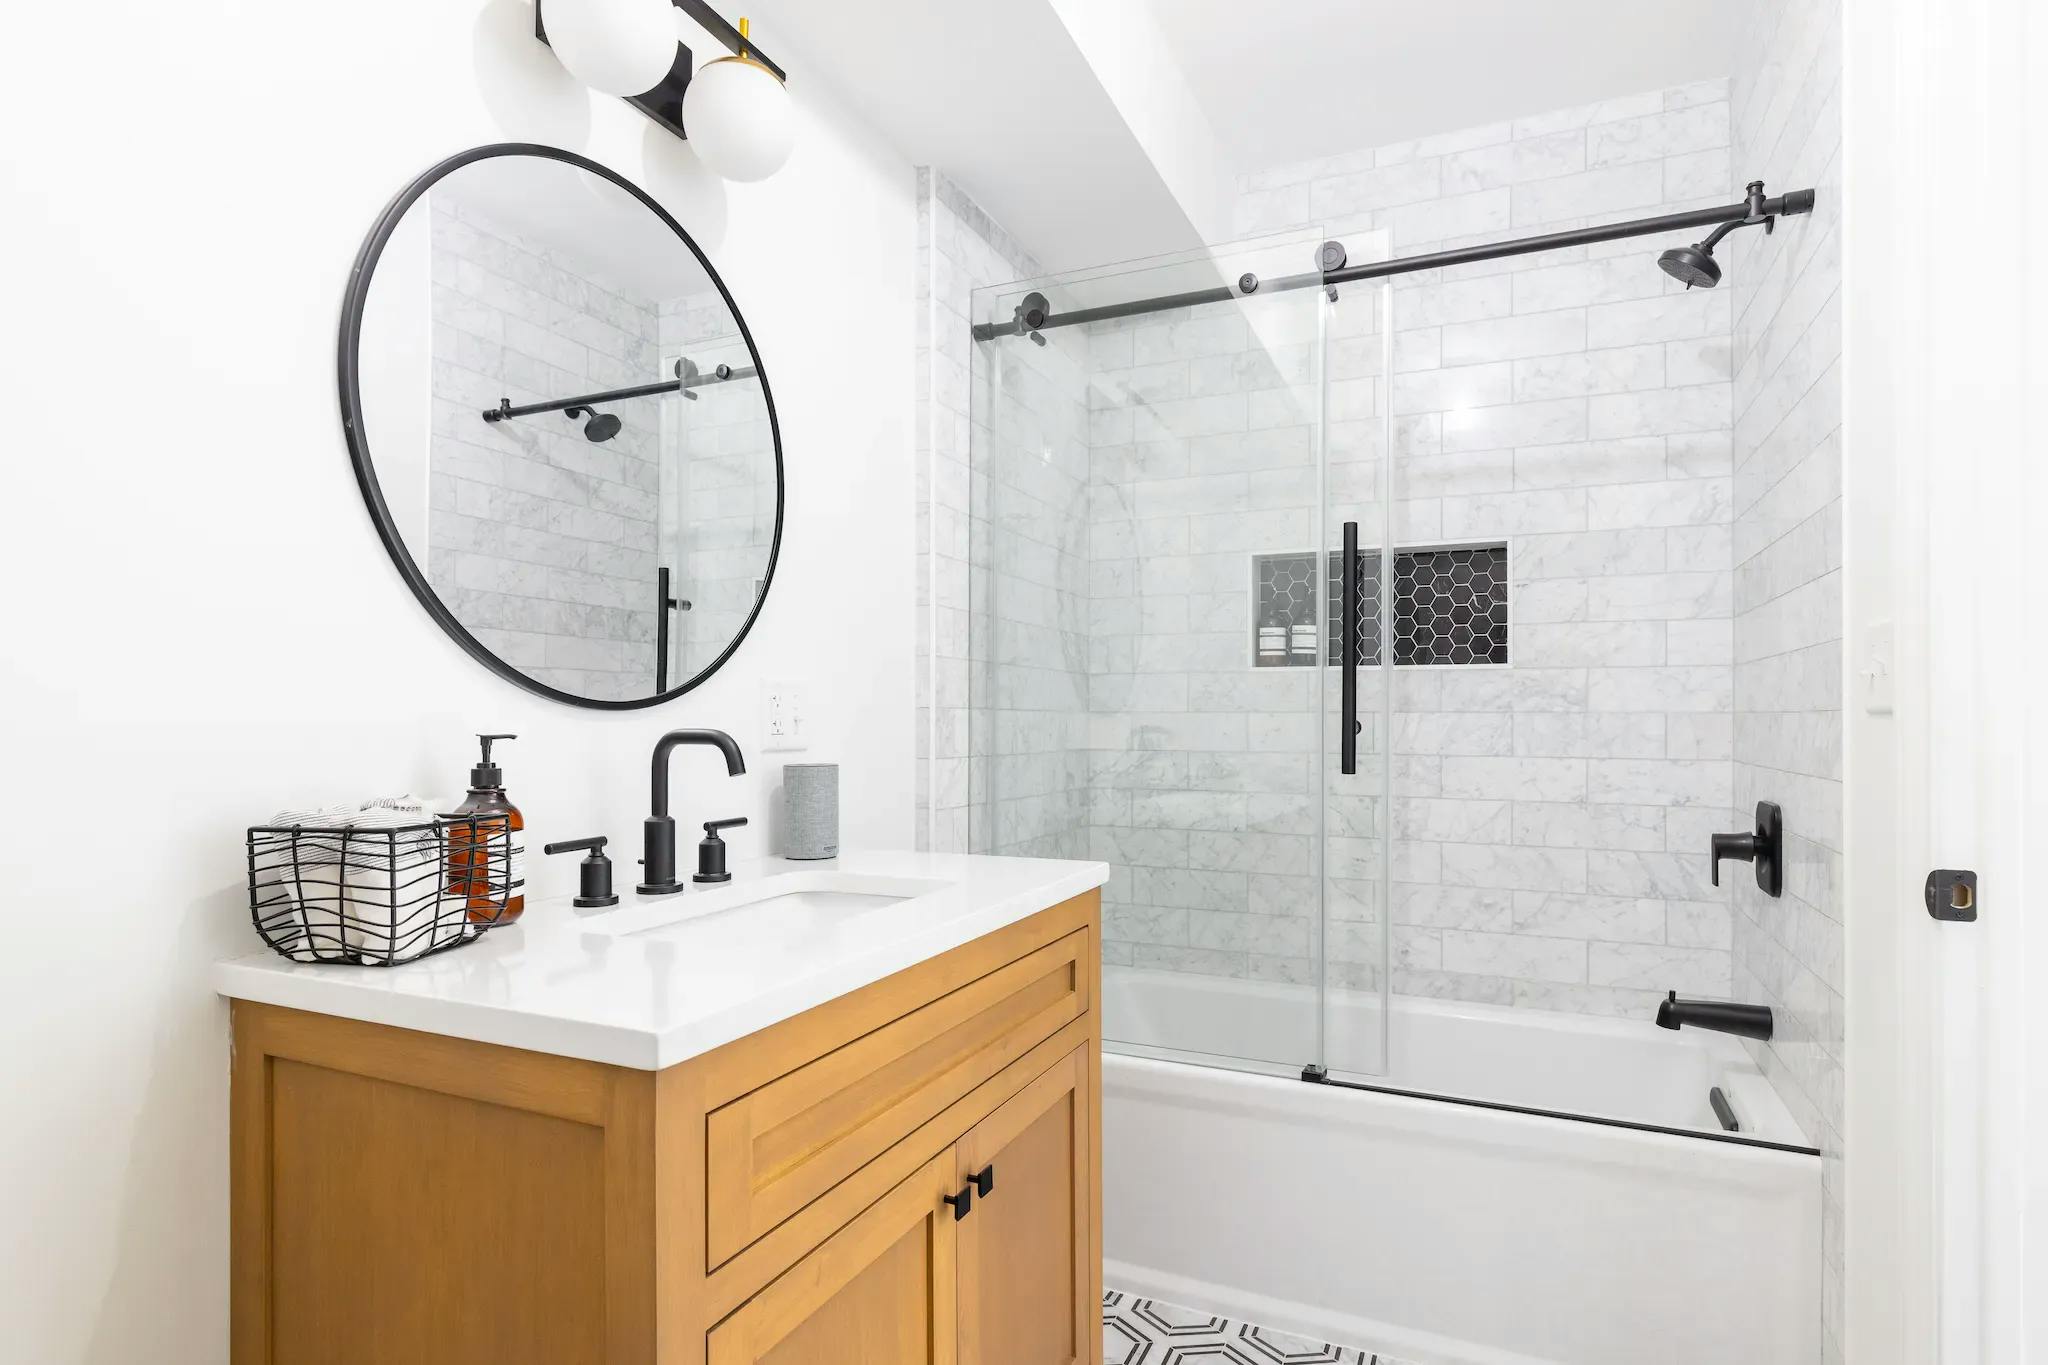 White bathtub, black hardware. Round mirror over white granite sink with soap and basket. Wooden shelving under the sink.